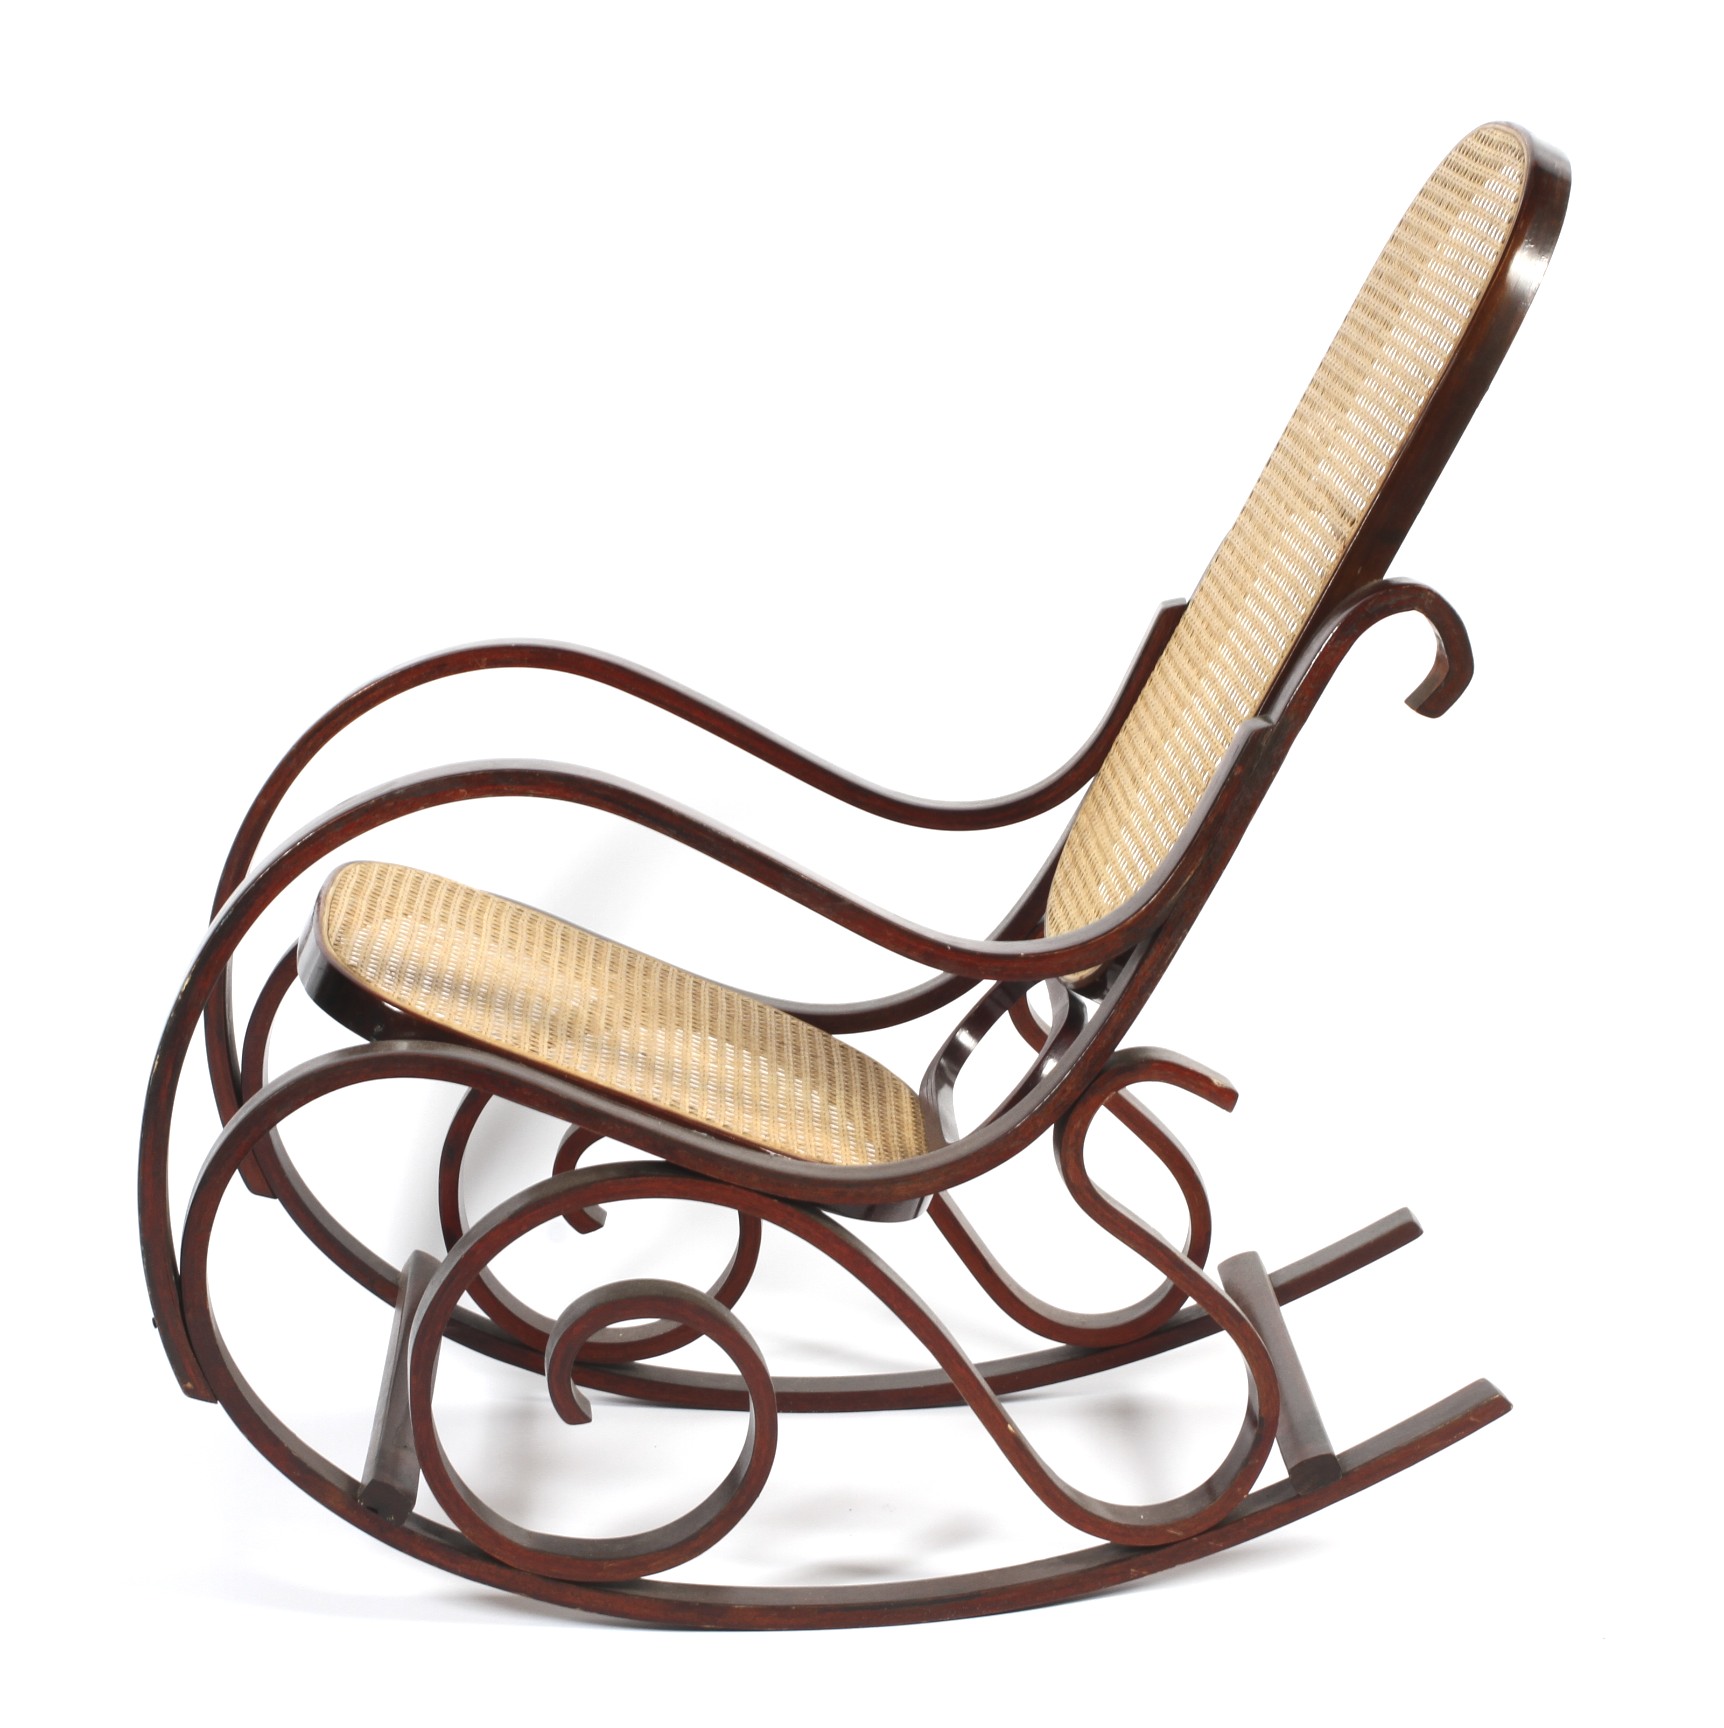 A 20th century Thonet style bentwood rocking chair.